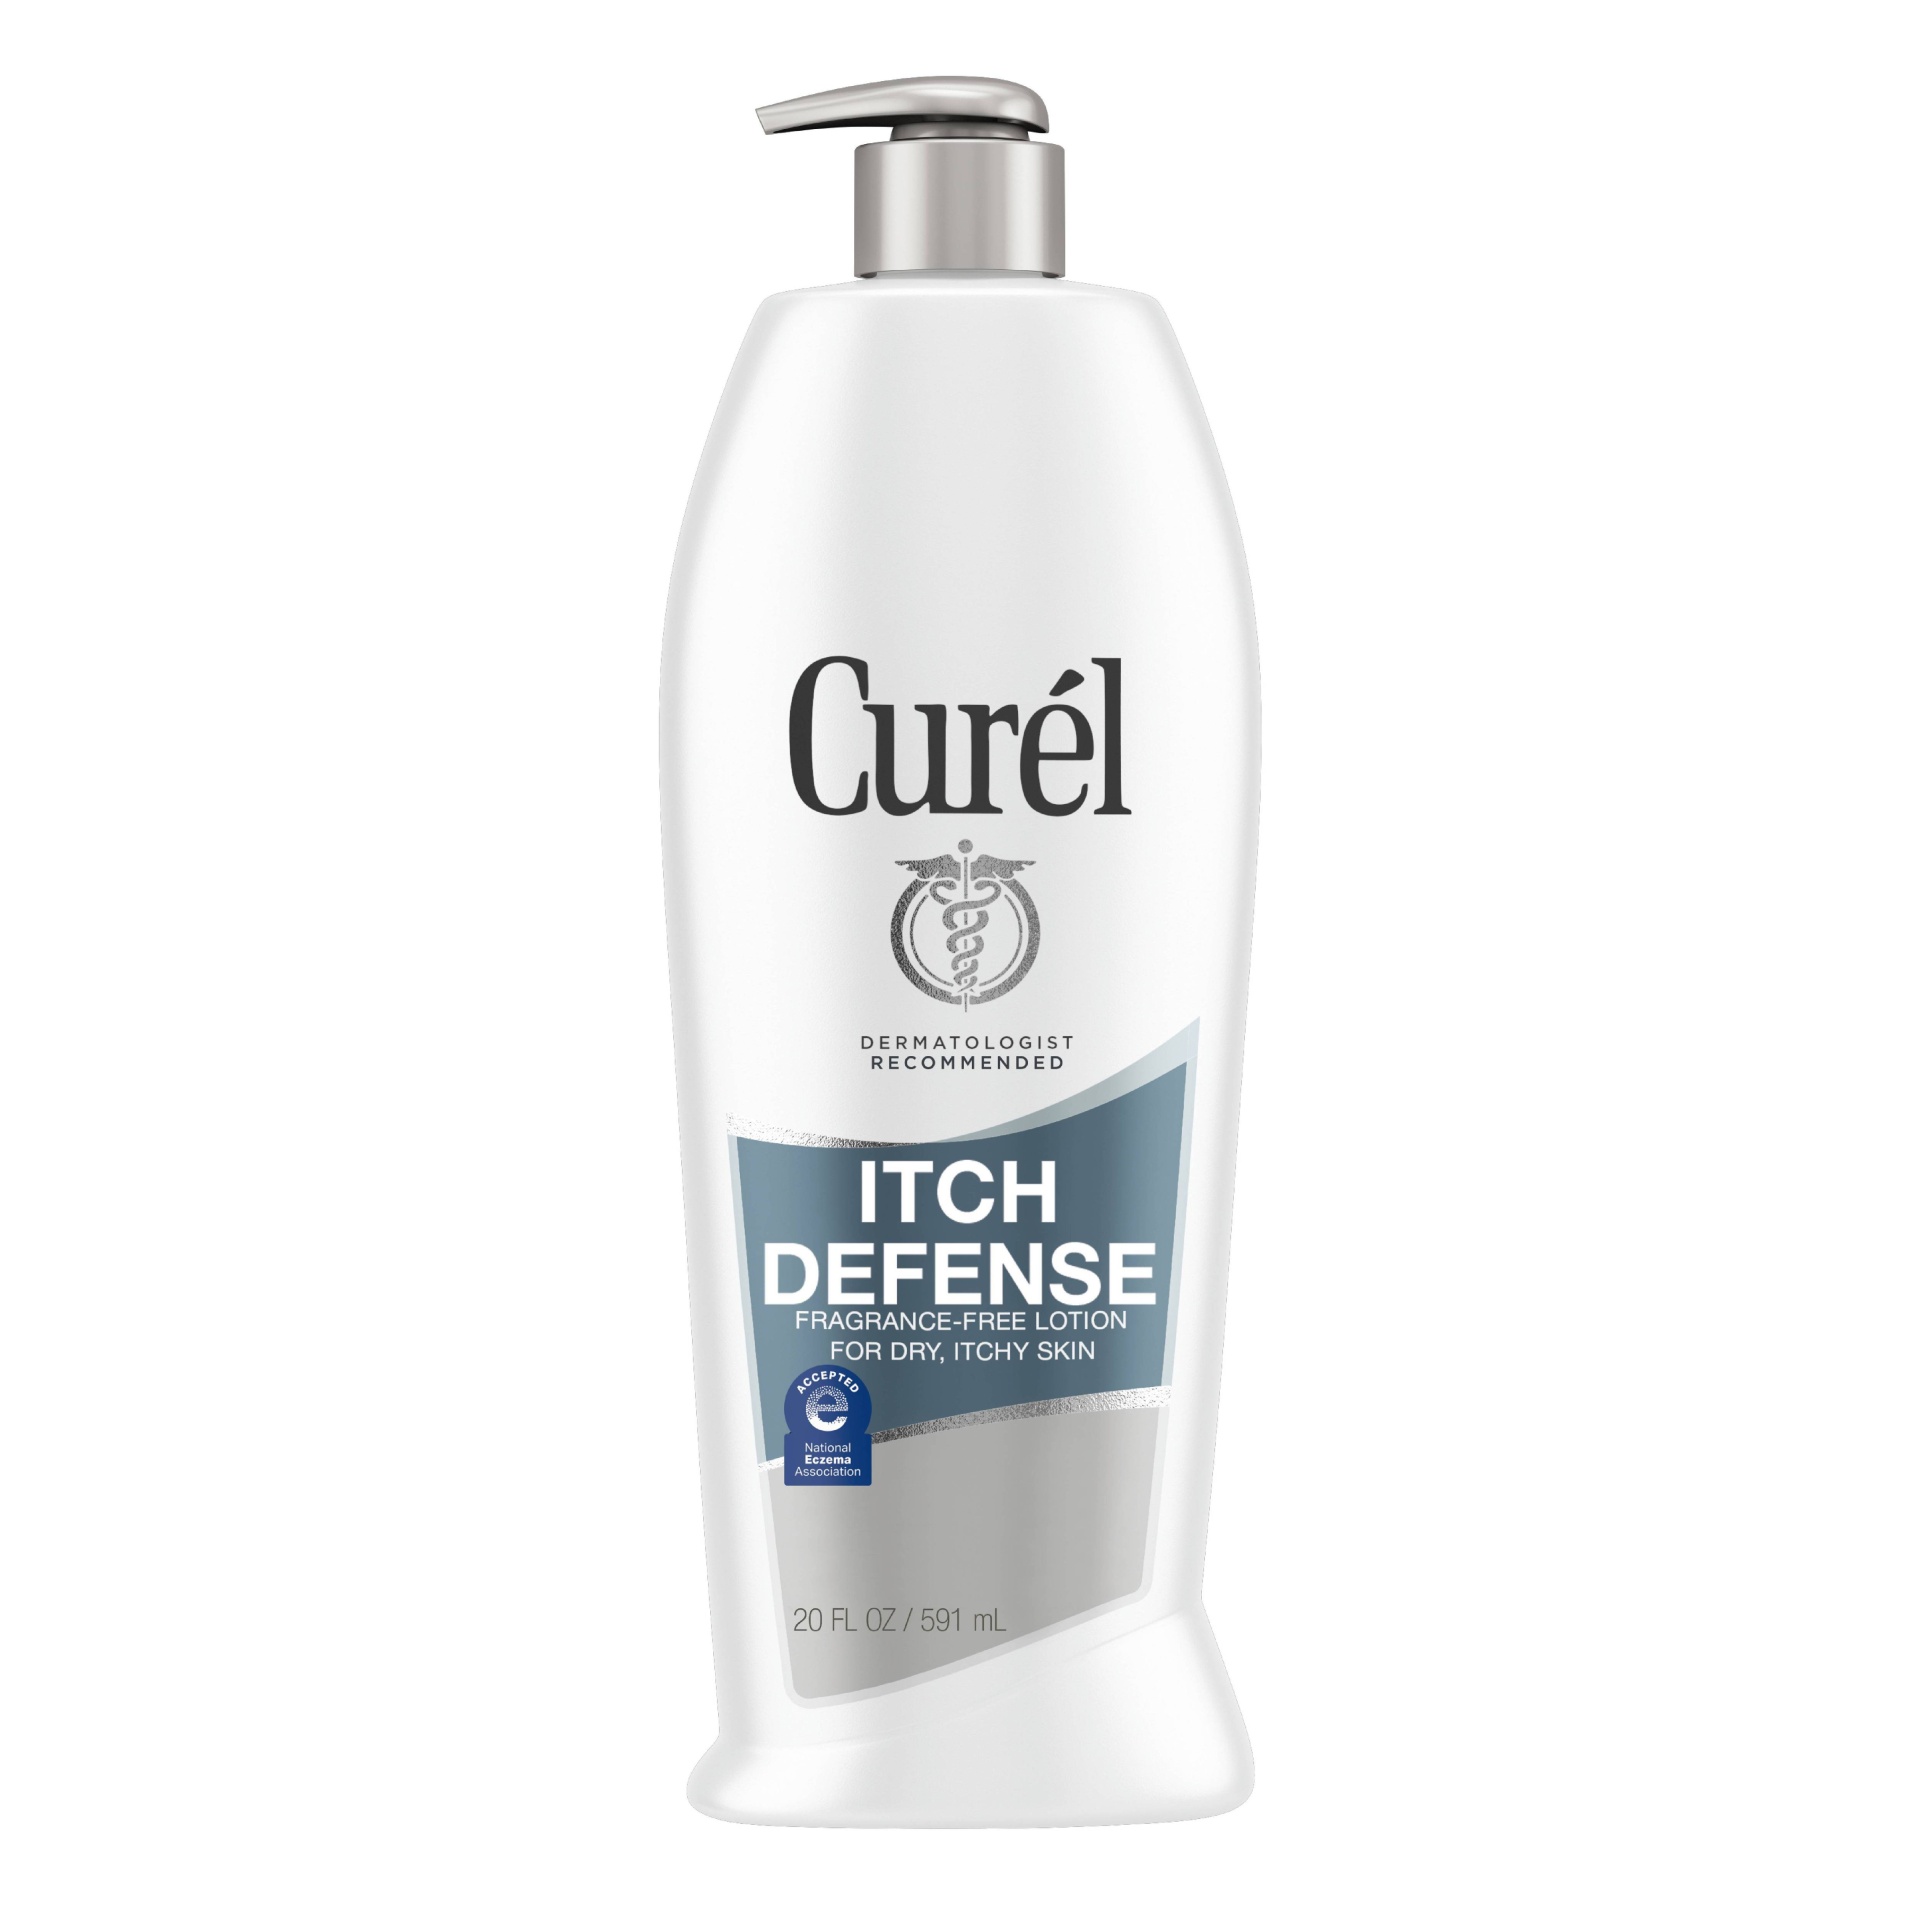 slide 1 of 6, Curel Itch Defense Hand and Body Lotion, Moisturizer For Dry Itchy Skin, Advanced Ceramide Complex - 20 fl oz, 20 fl oz